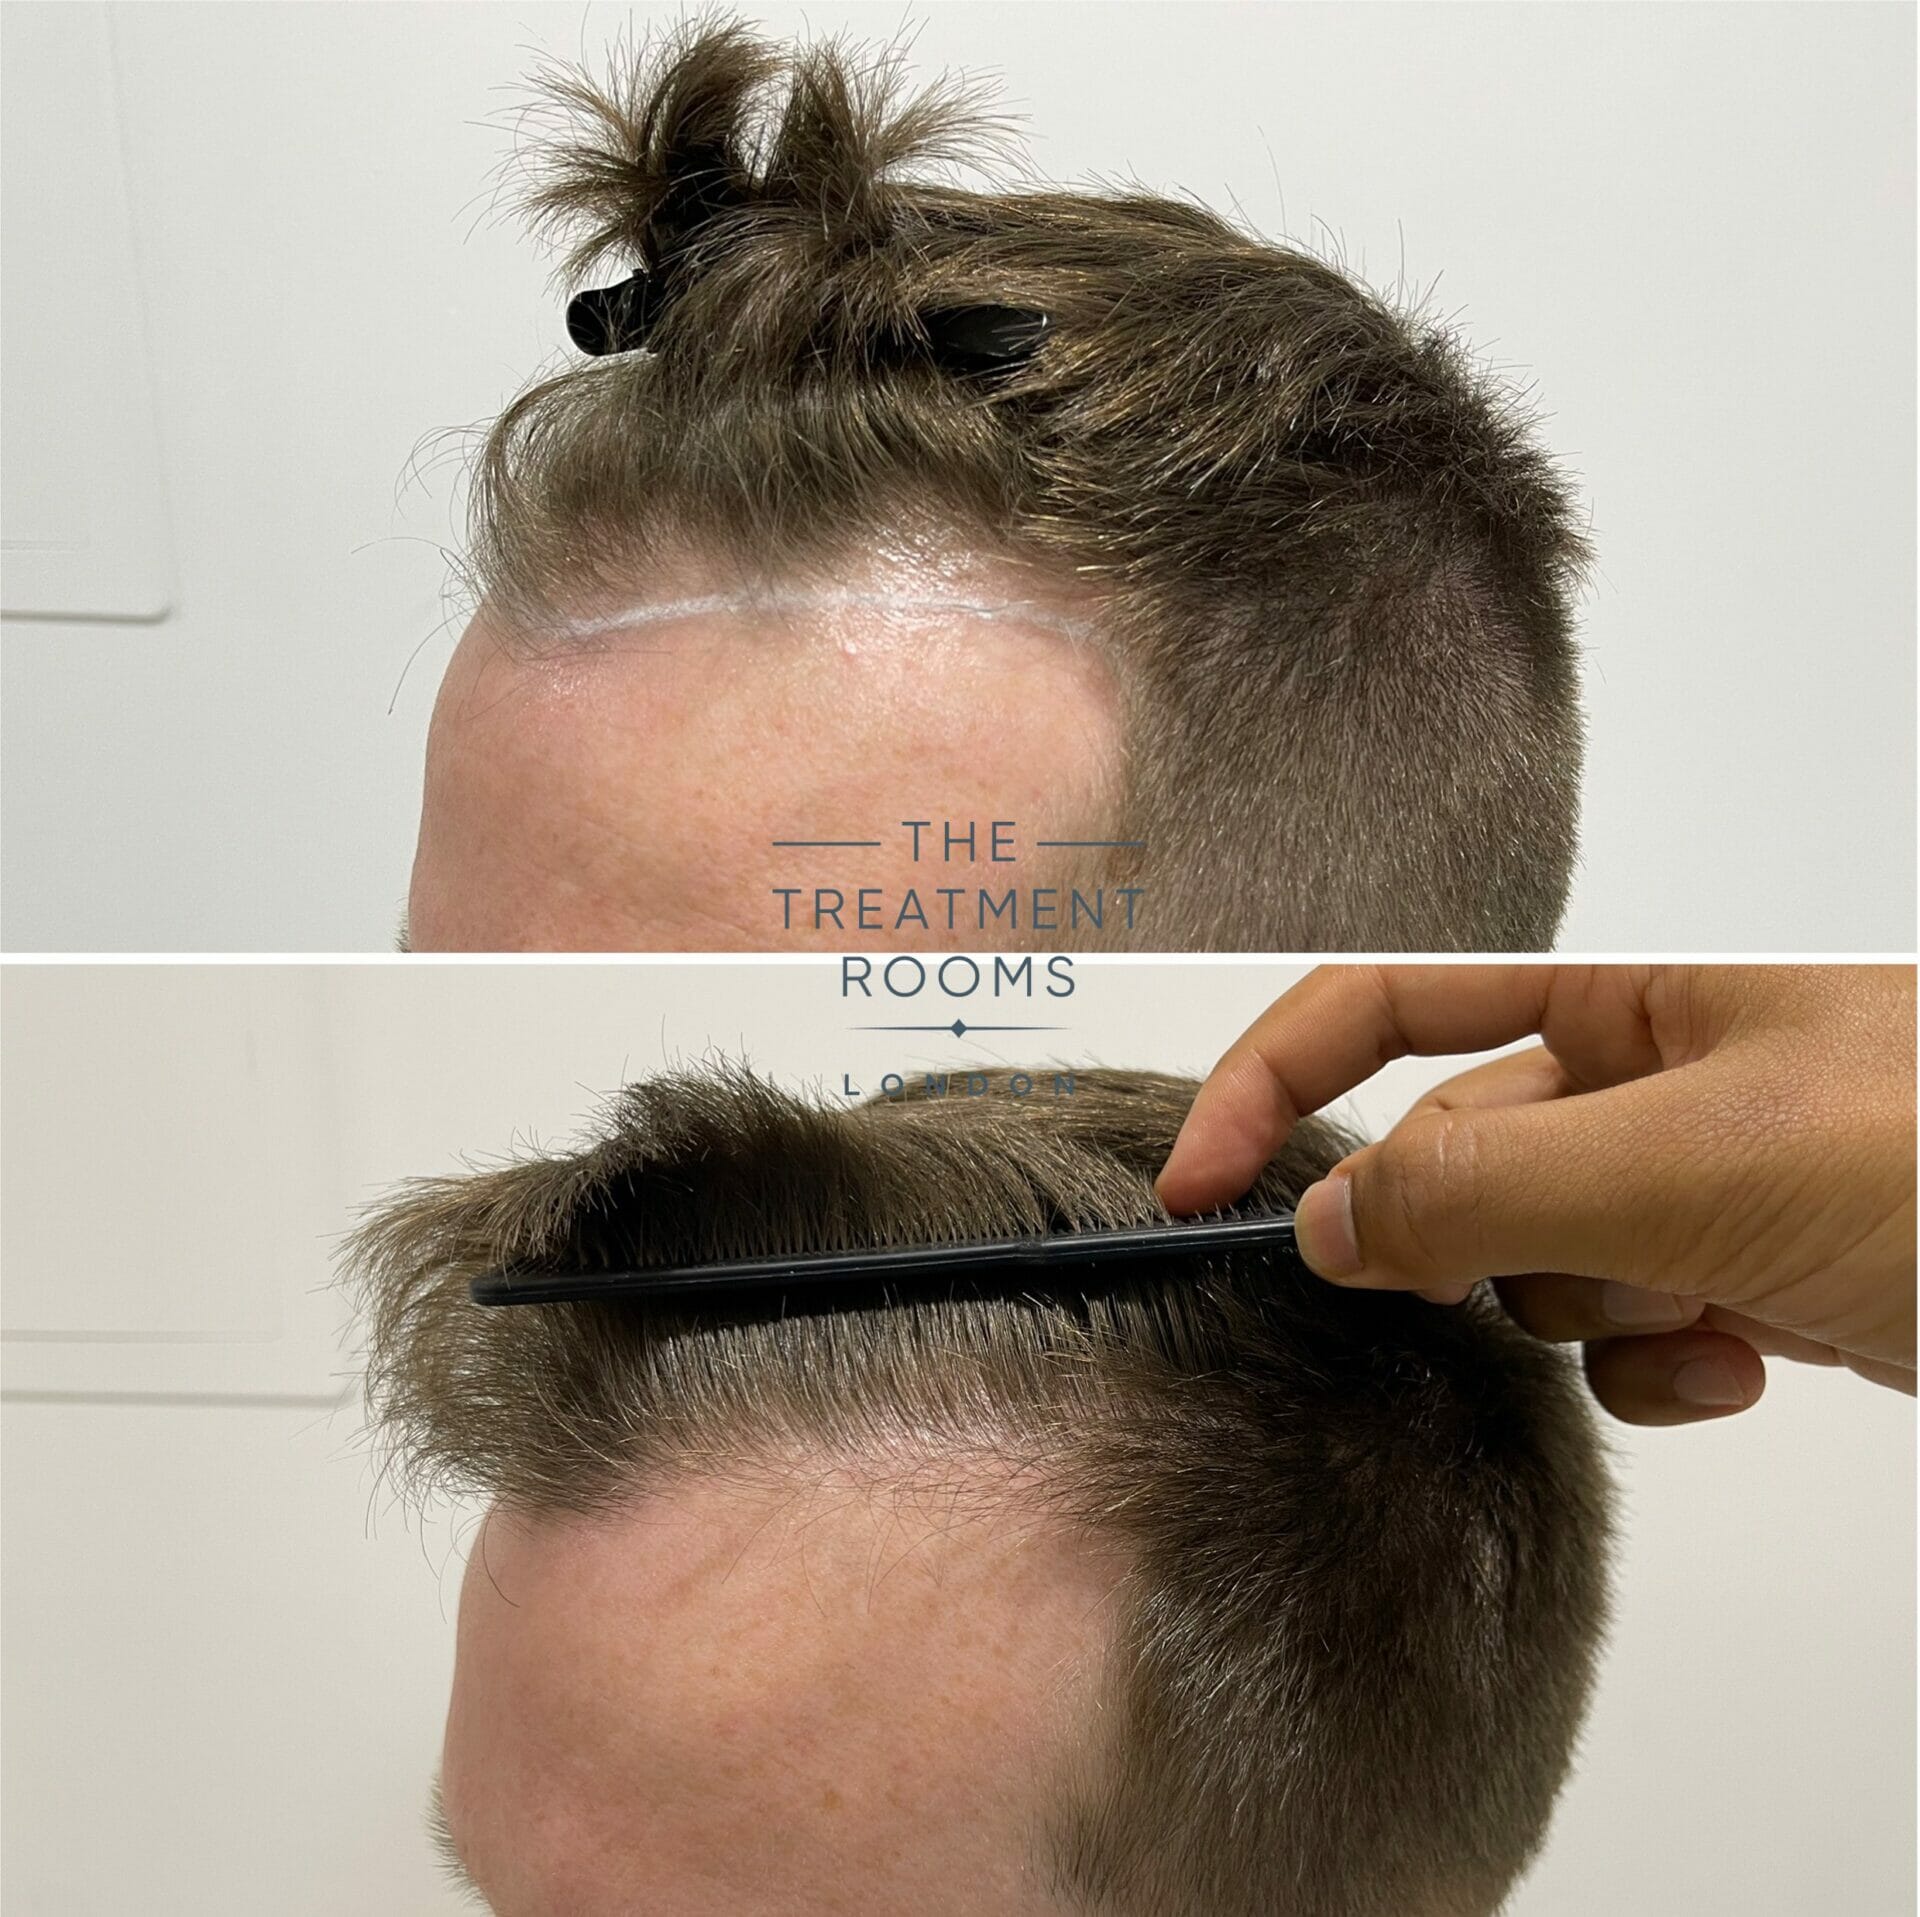 is a hair transplant permanent?